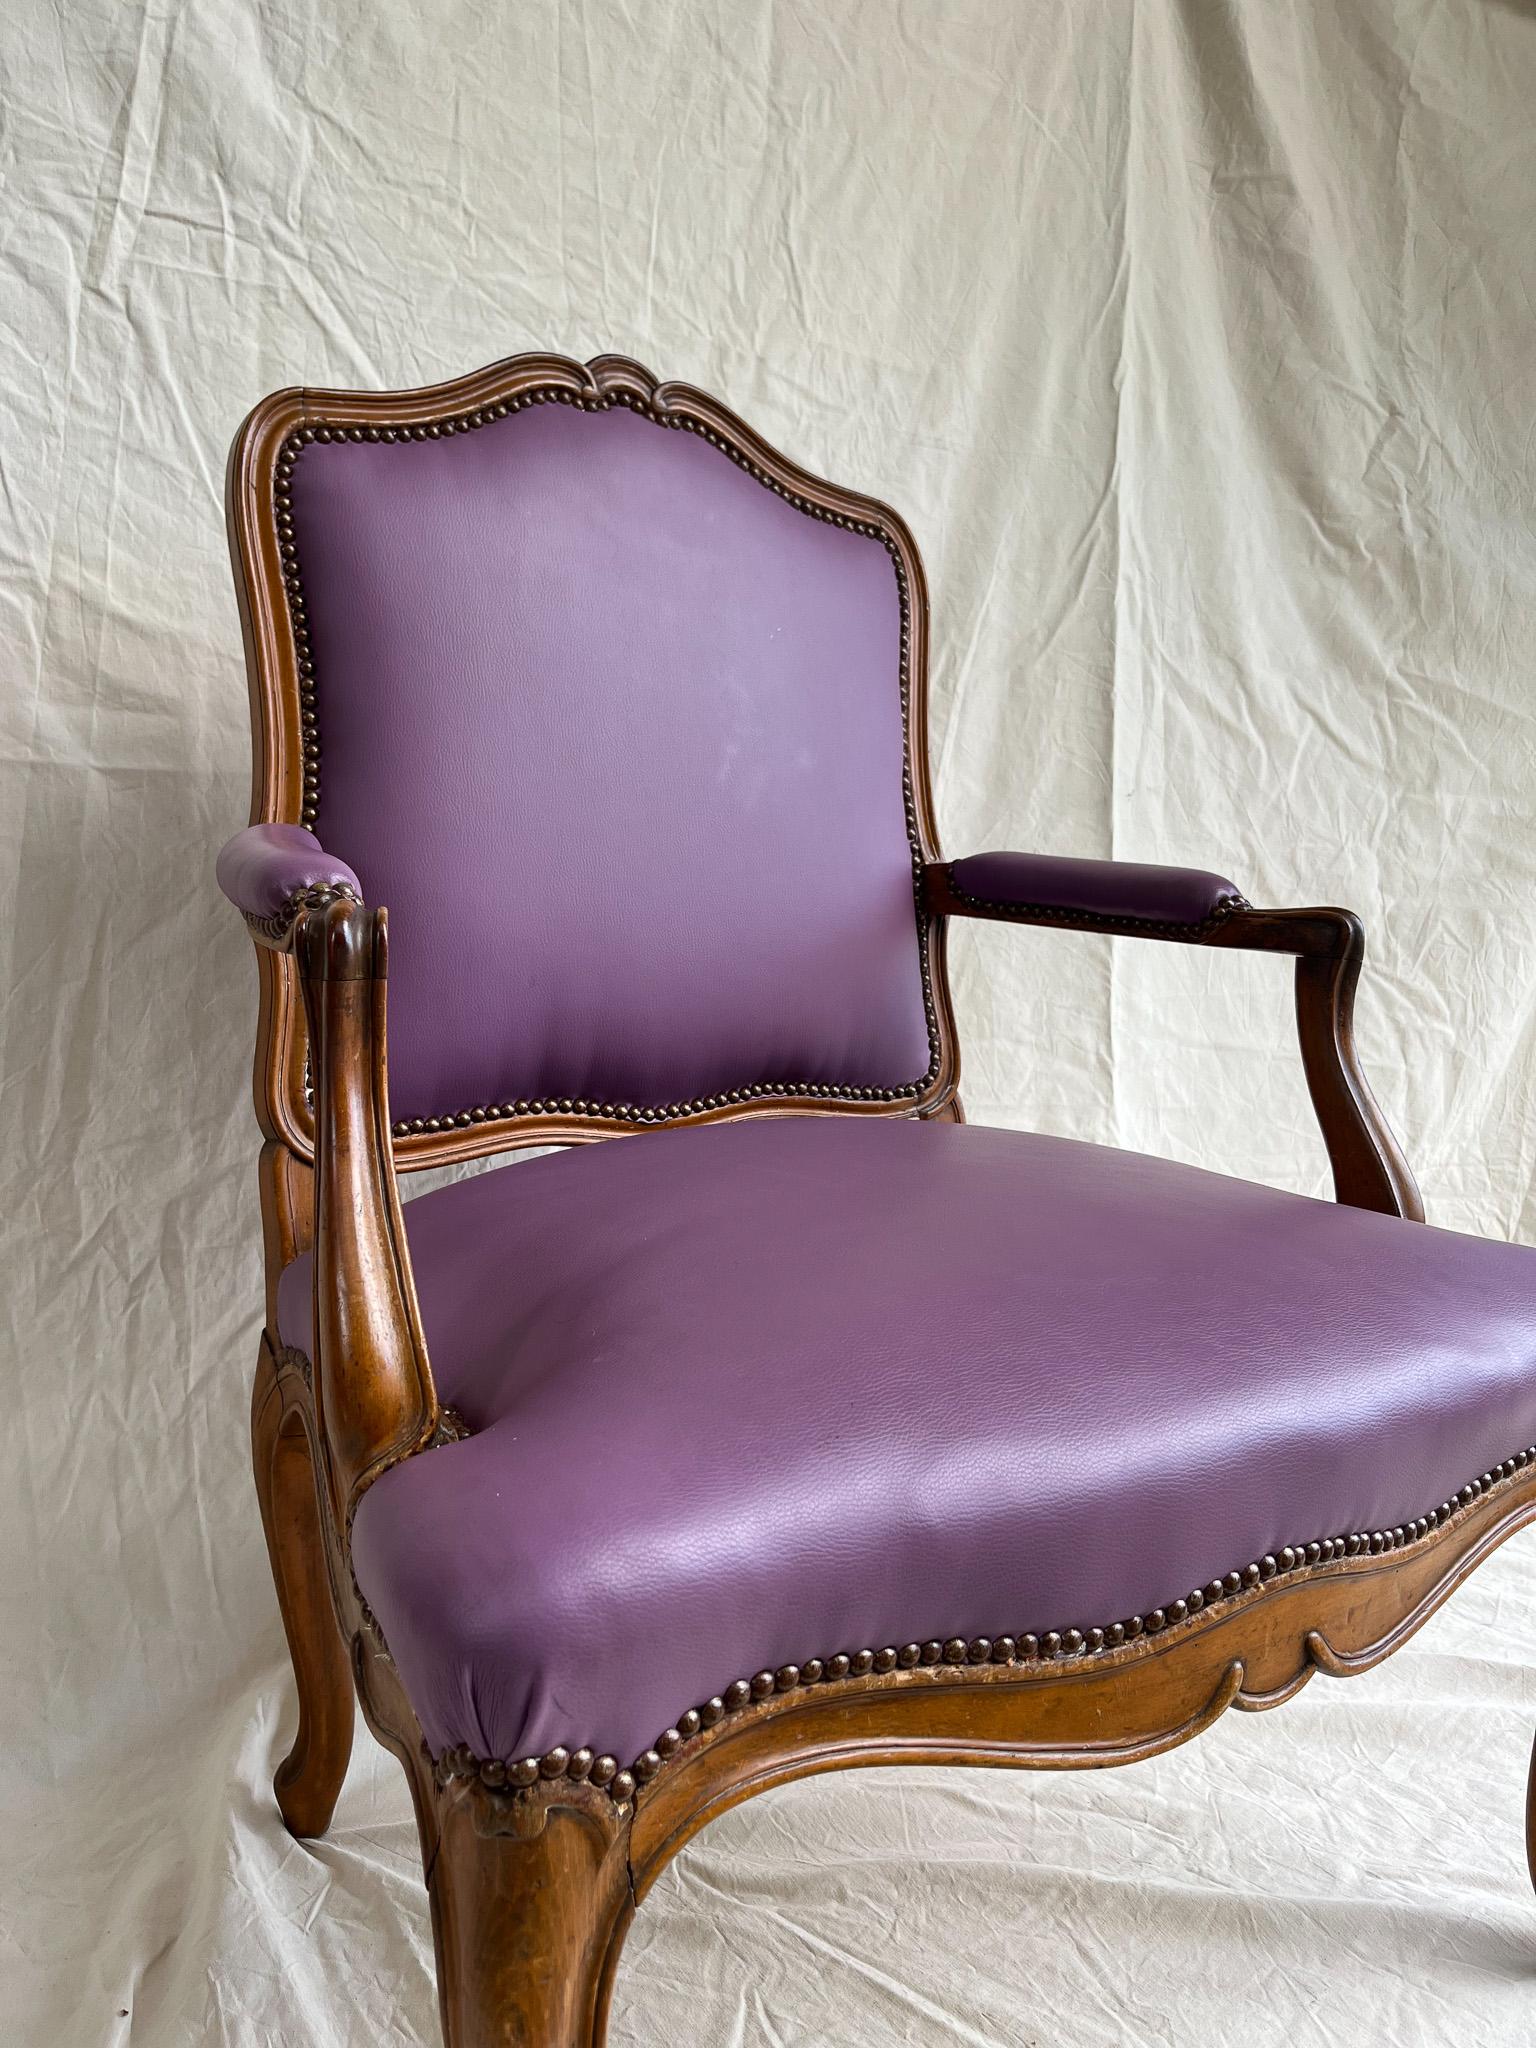 Set of Two Louis XVI Chairs, in Carved Walnut, France, 18th Century '1774-1791' For Sale 5